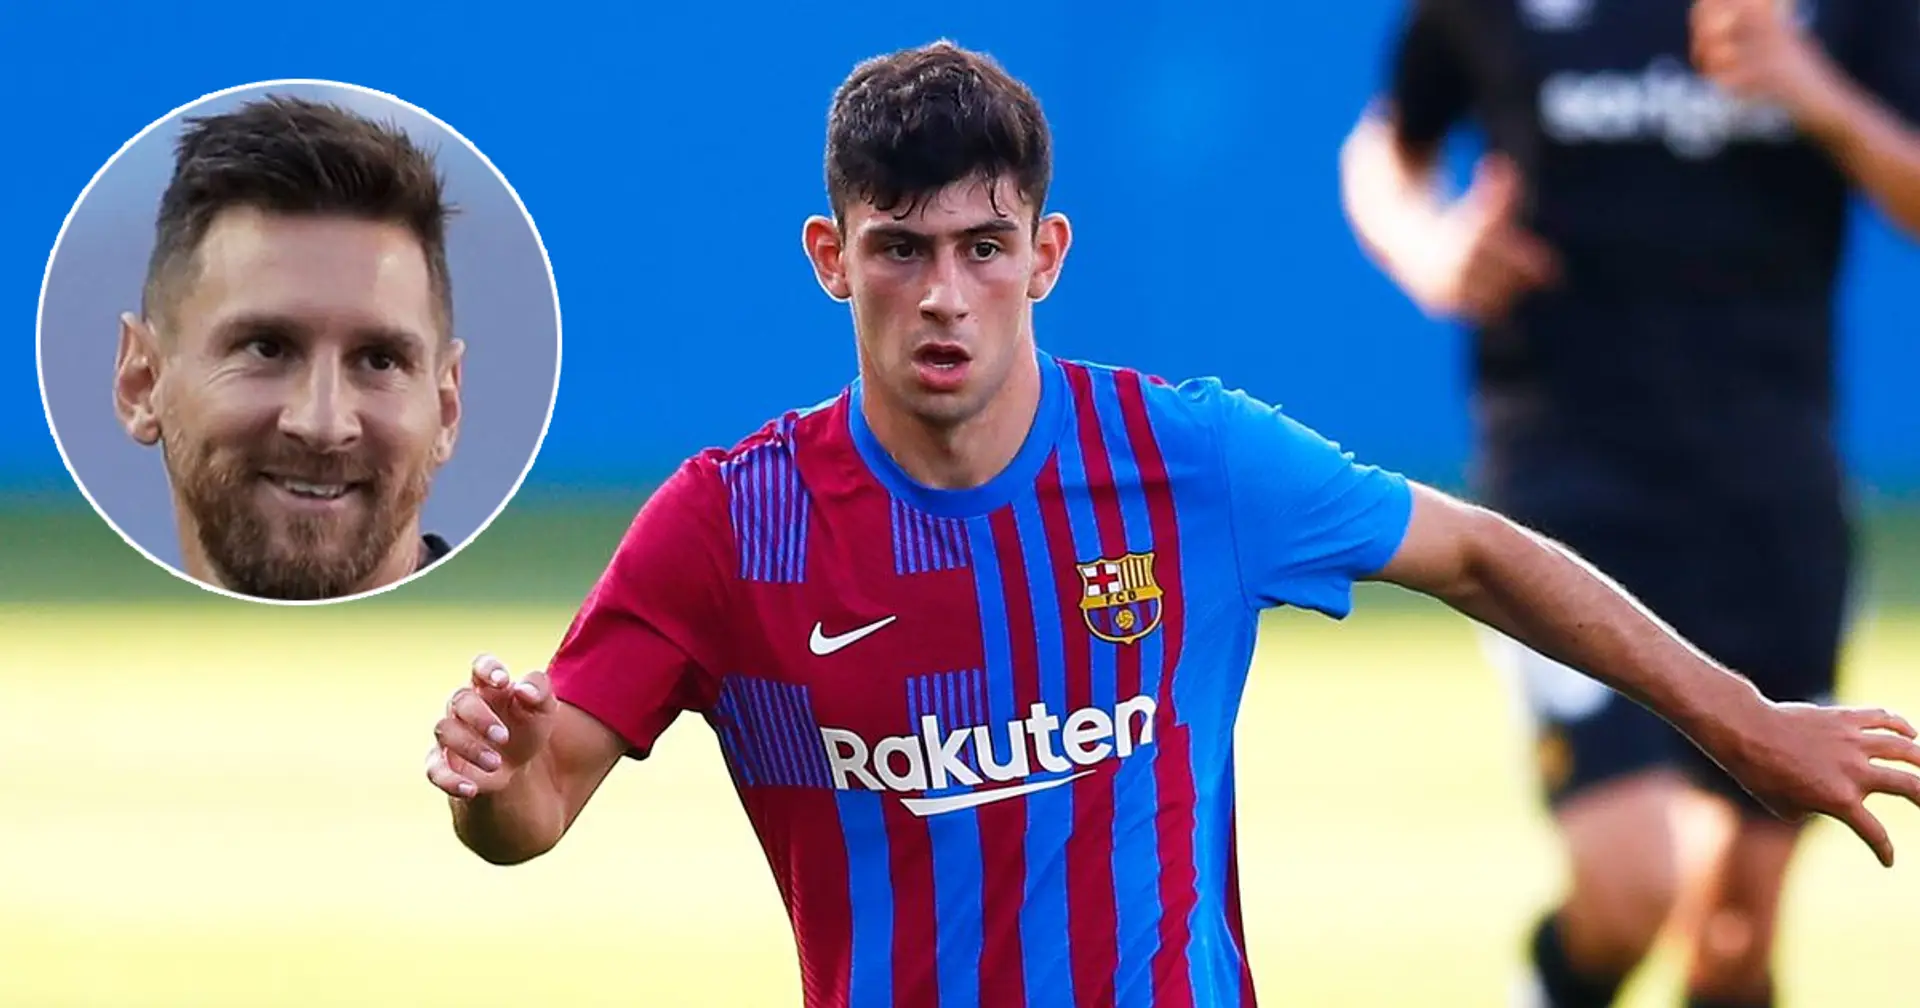 'He's like a mini Messi': fans spots 4 similarities between Demir and Leo as youngster impresses v Nastic